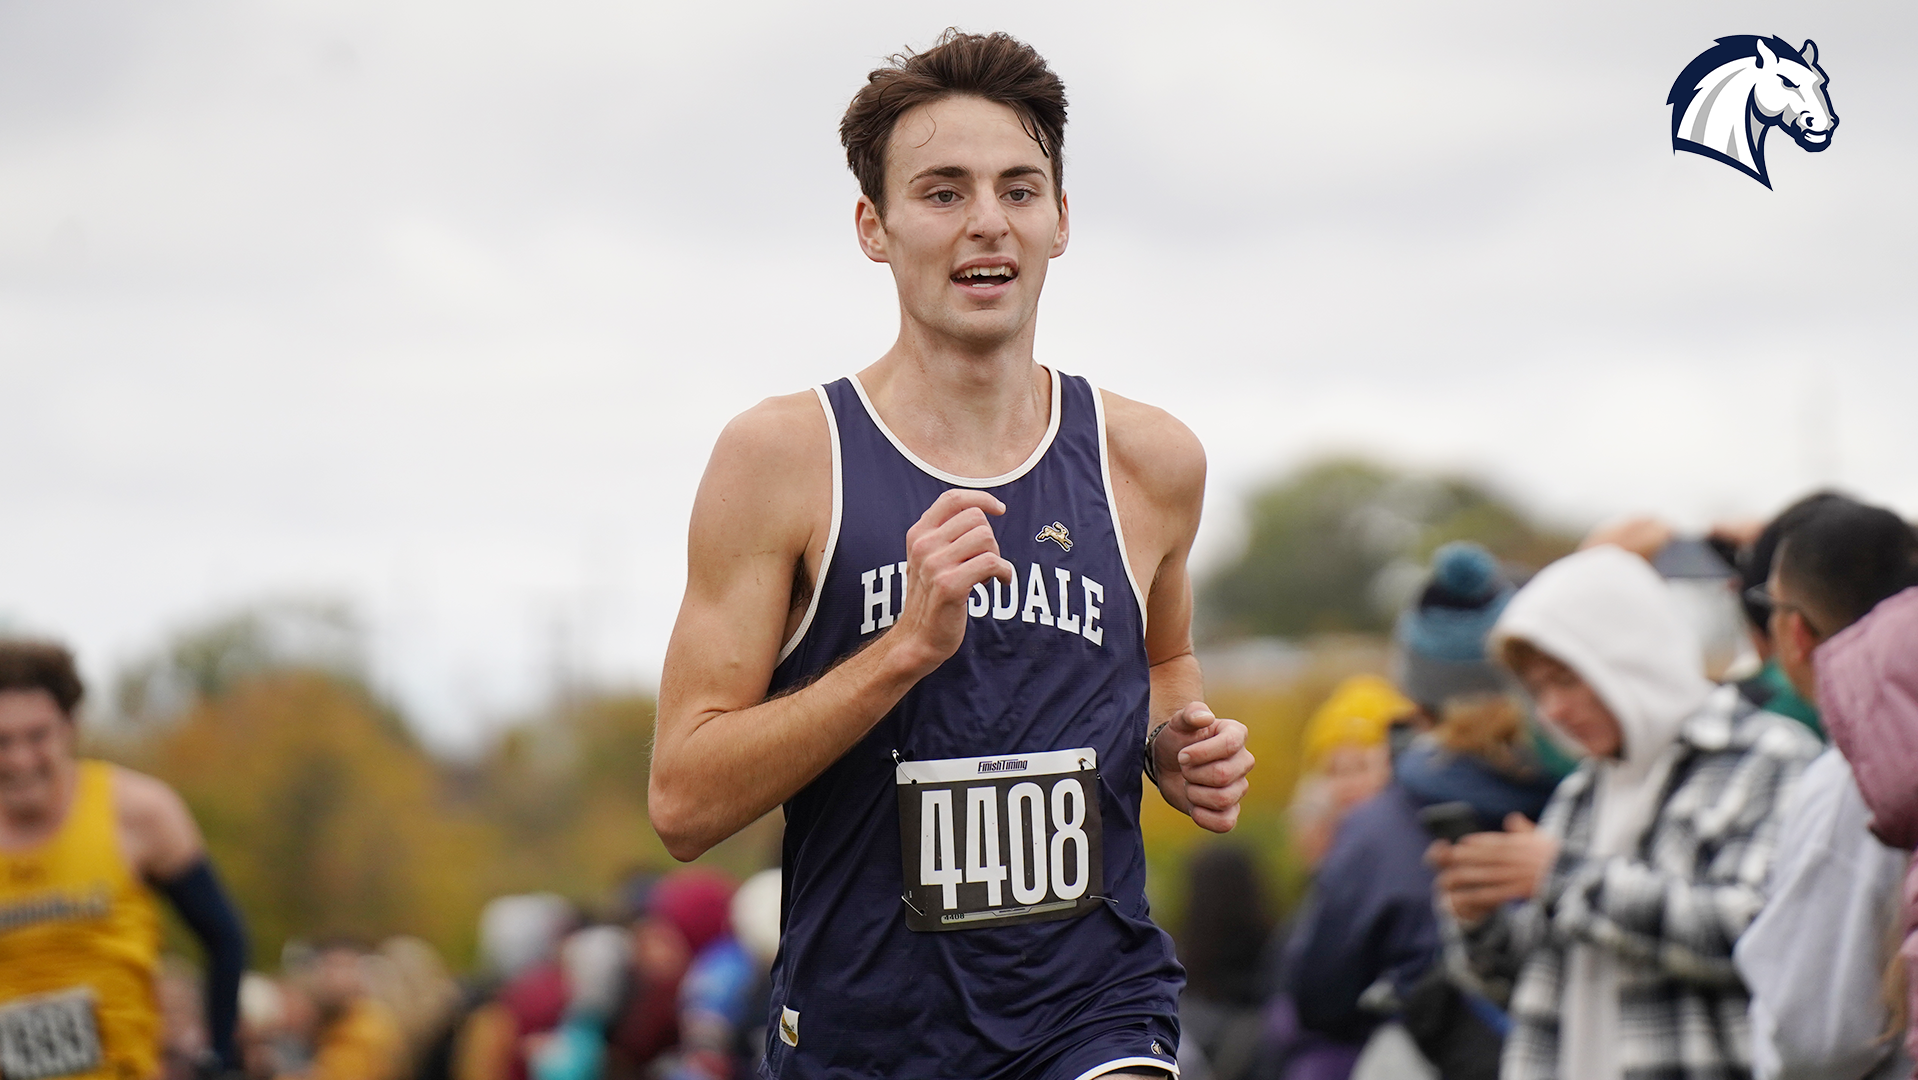 Two Chargers earn first-team All-G-MAC honors as Hillsdale takes sixth at G-MAC Championships